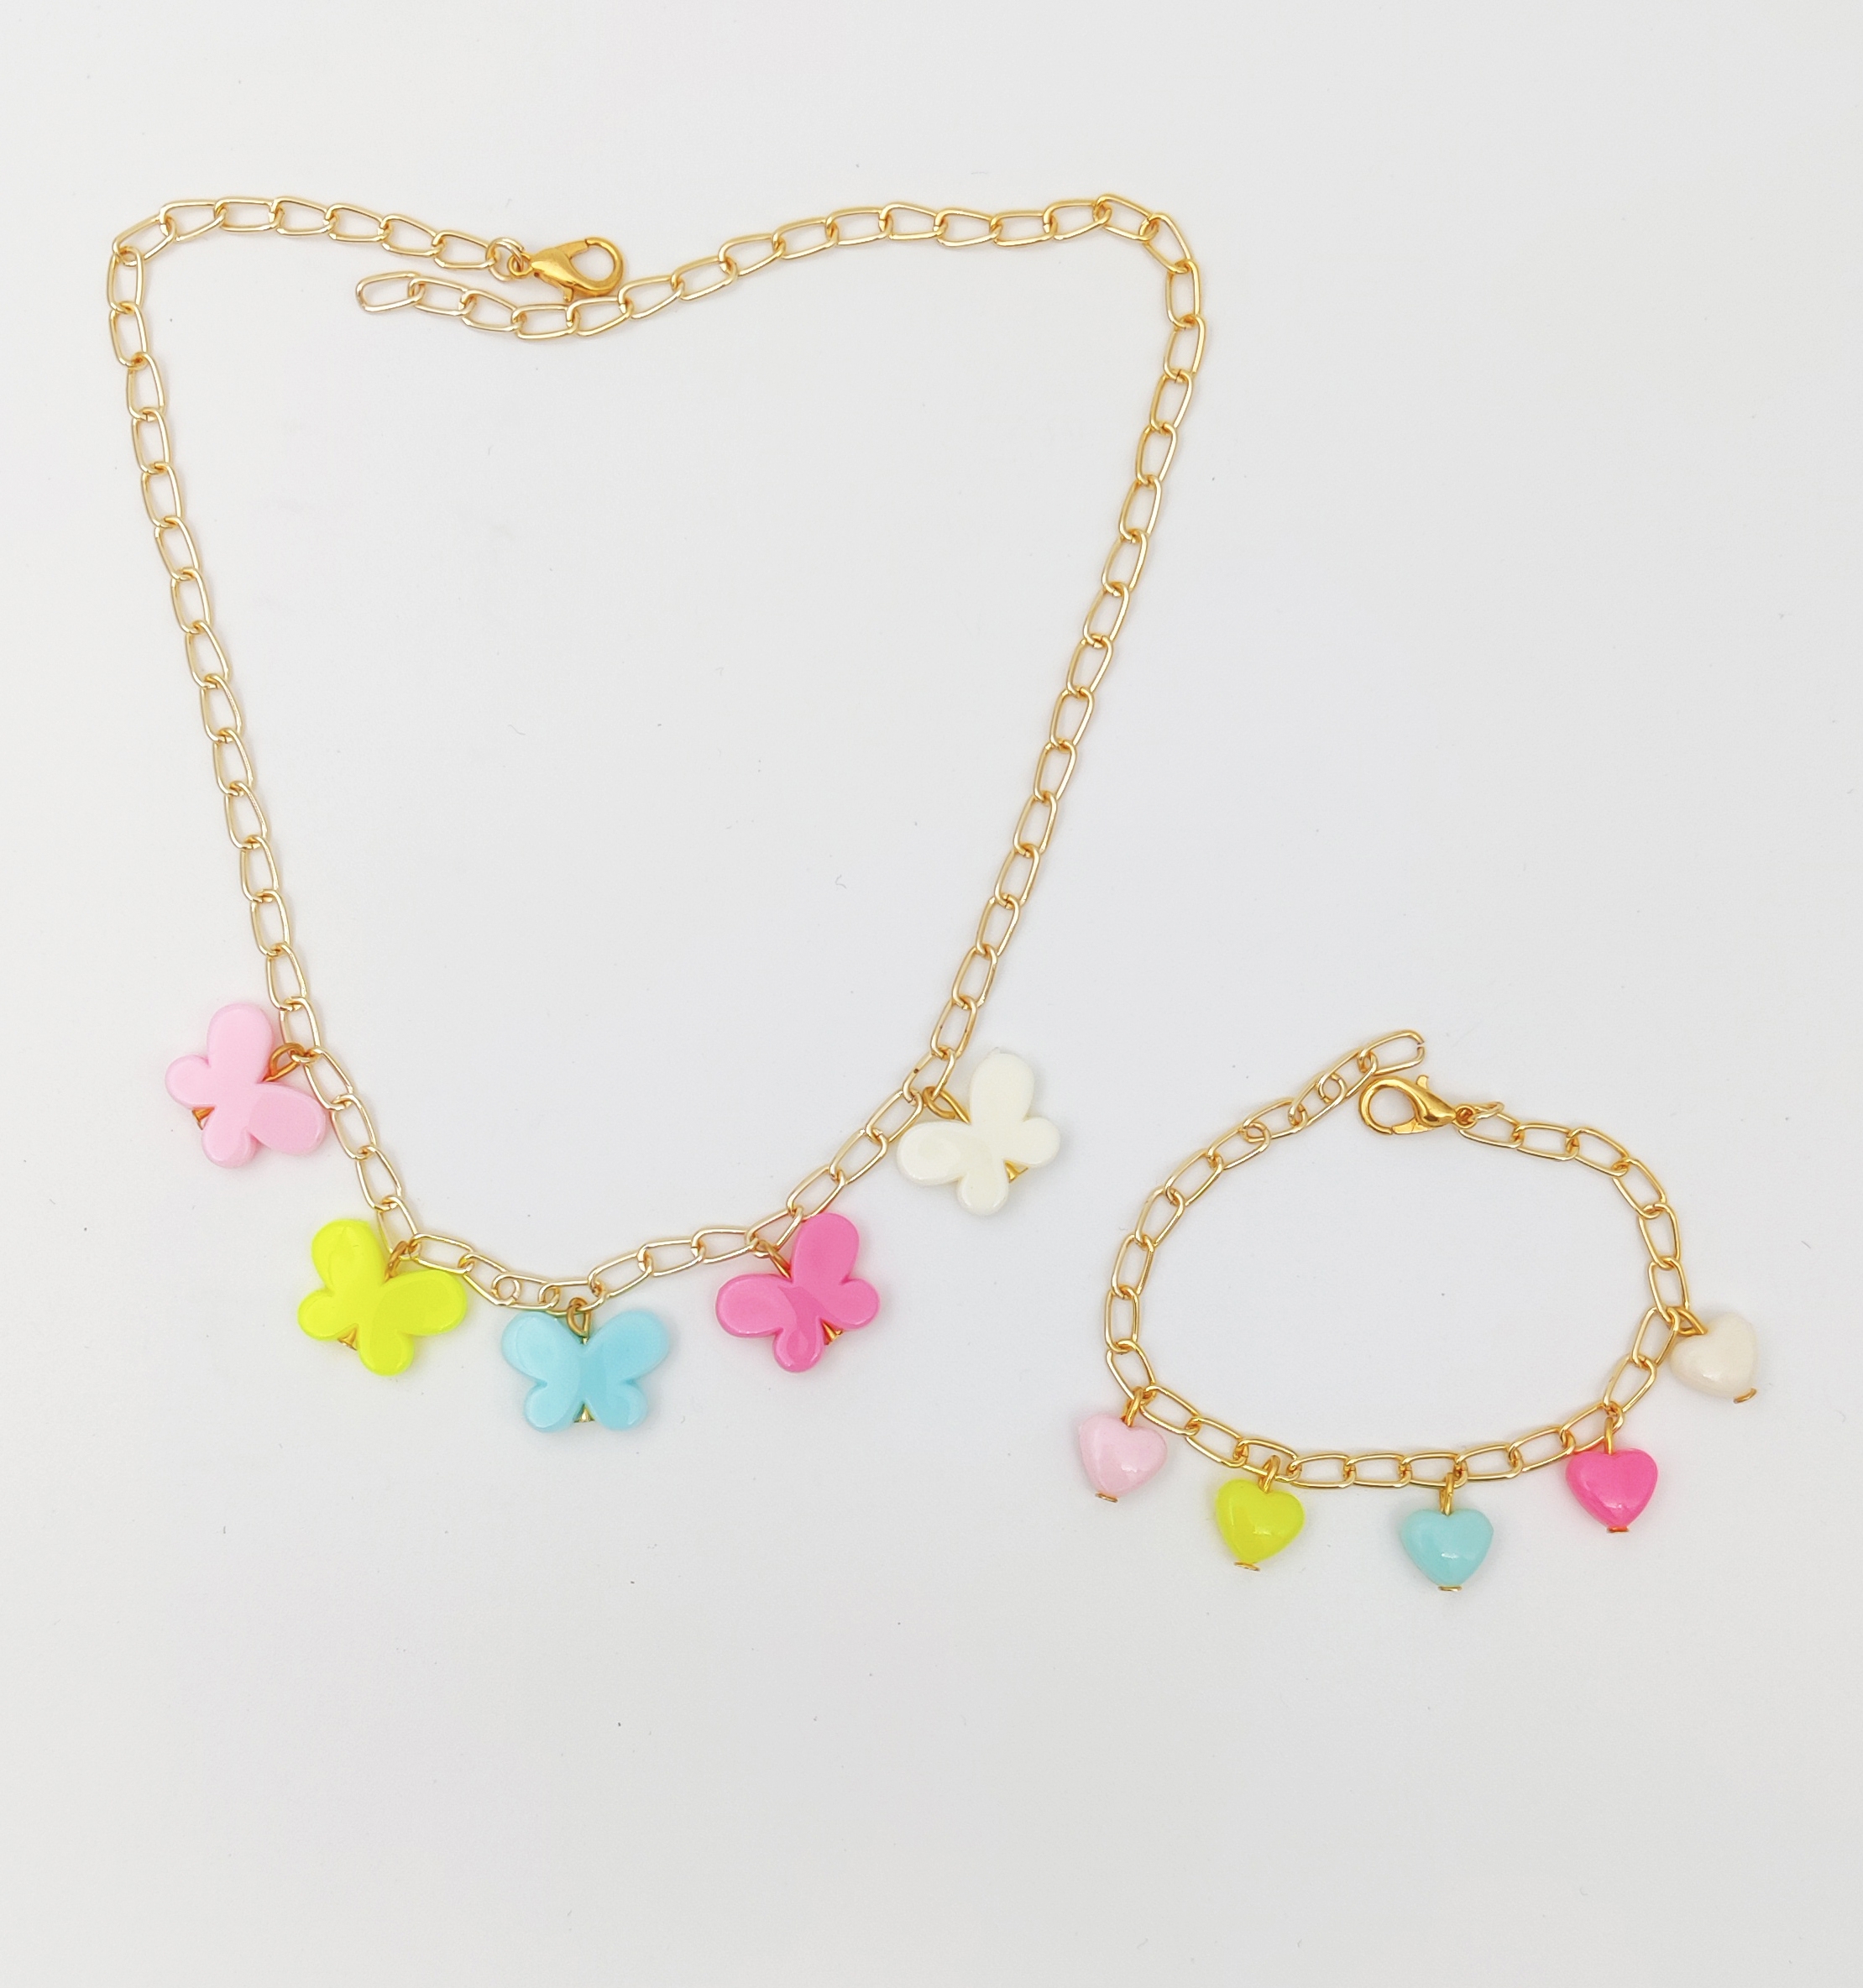 Butterfly Charms Necklace & Bracelet Set, Pink, Yellow, Blue